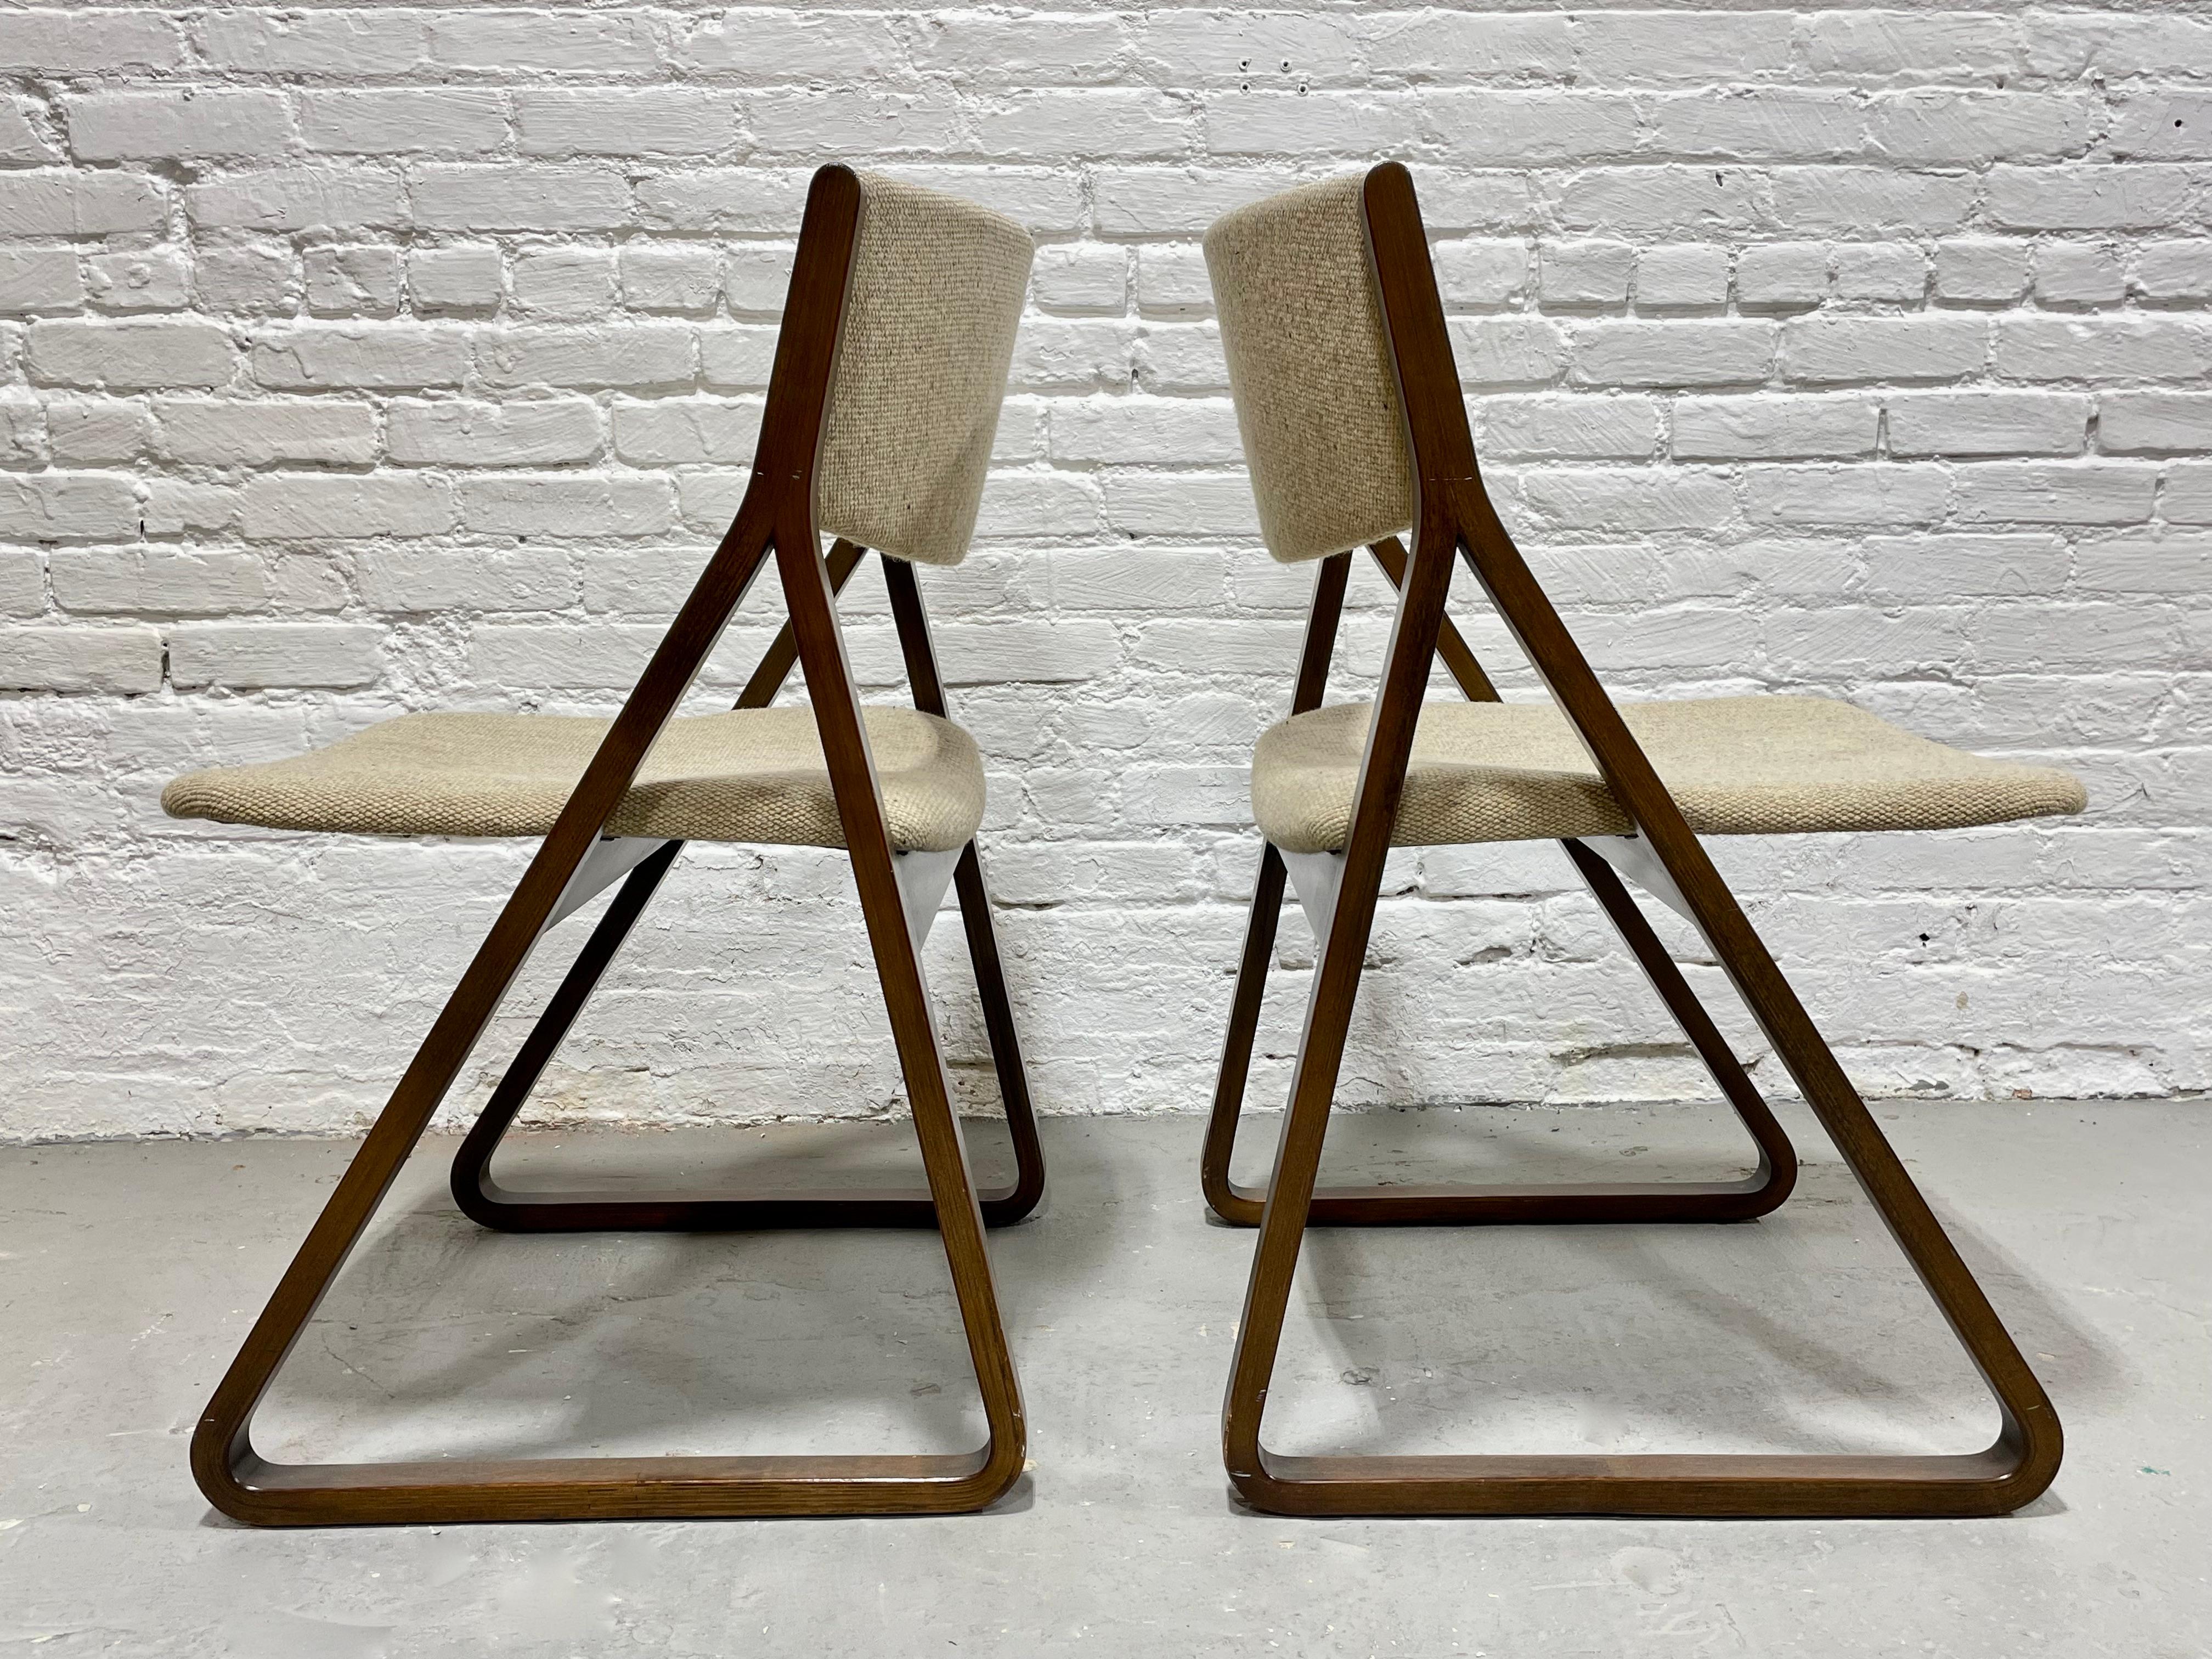 Pair of Rare Mid Century Modern “Triangle” Chairs designed by Robert DeFuccio for Stow Davis.  The triangular profile of the chairs is incredible and the oatmeal colored upholstery contrasts beautifully with the darker walnut frames. Lovely